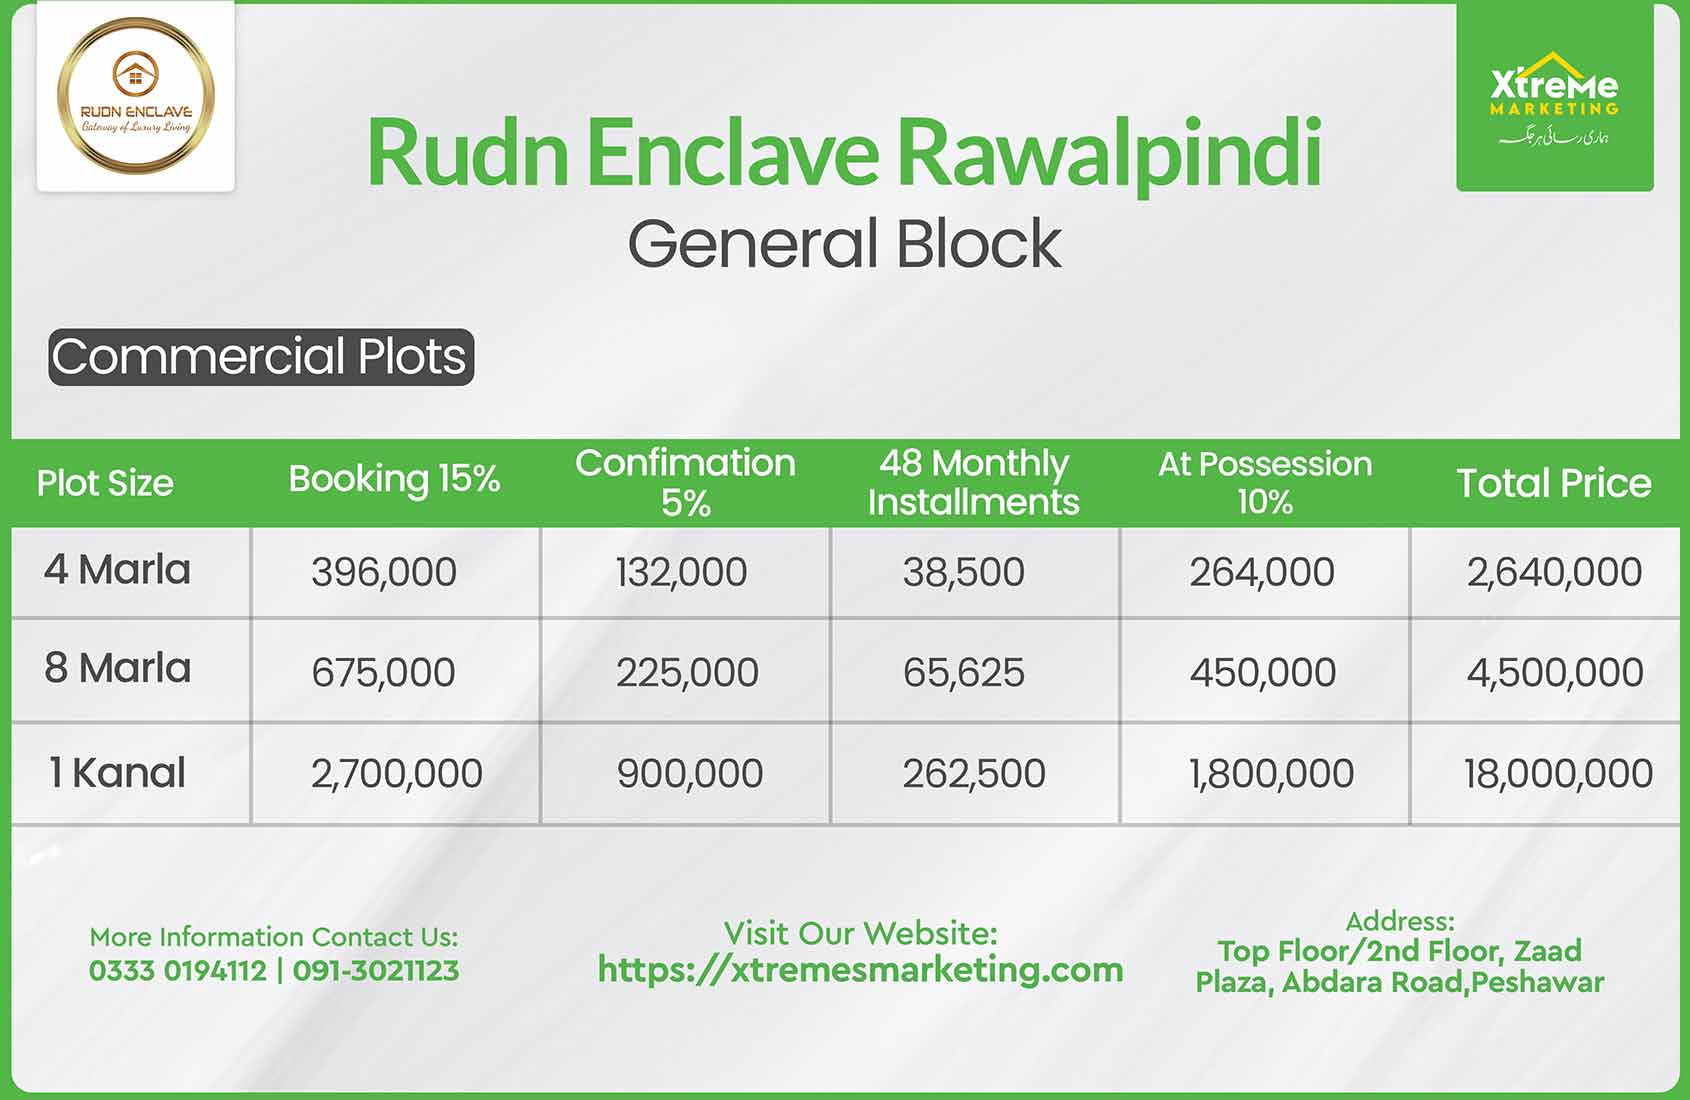 Payment Plan of the rudn enclave Commercial plots in General Block.